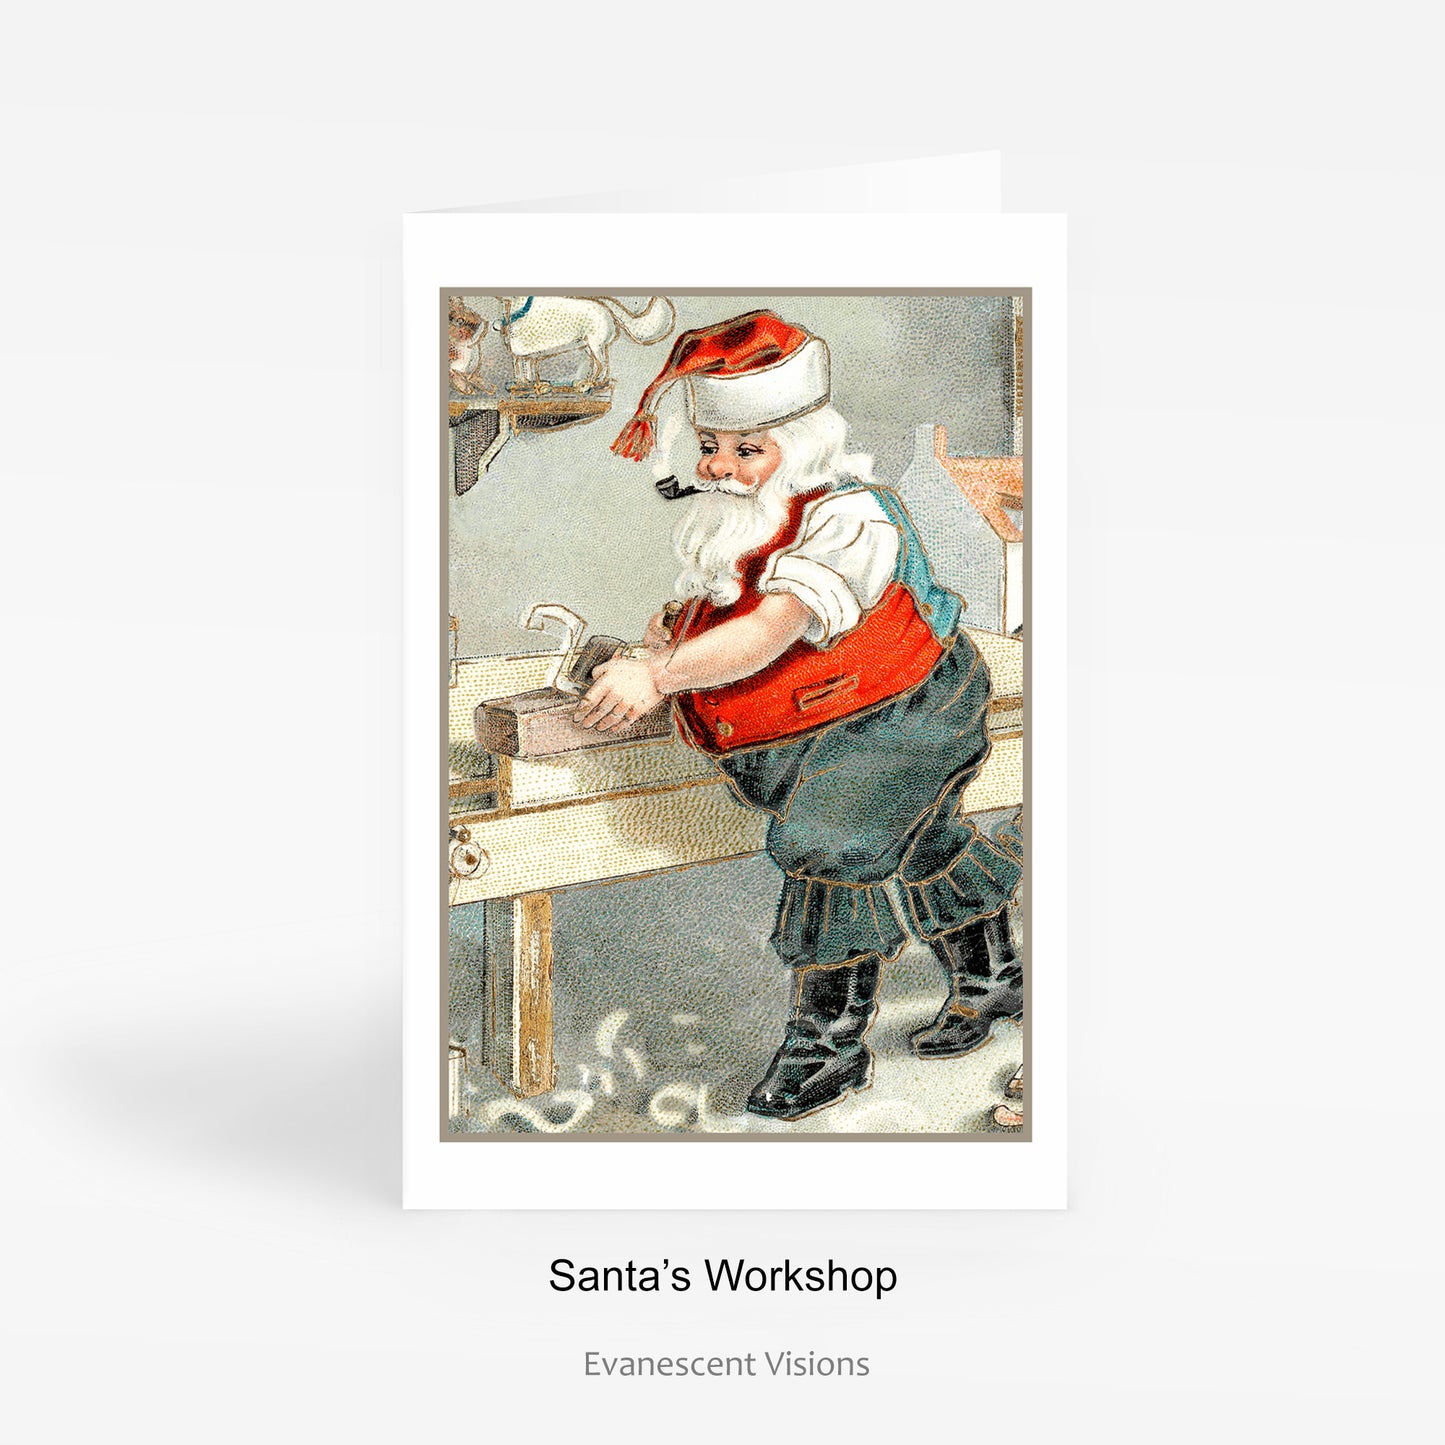 Vintage Victorian and Edwardian Illustration Christmas Card with Santa in his workshop